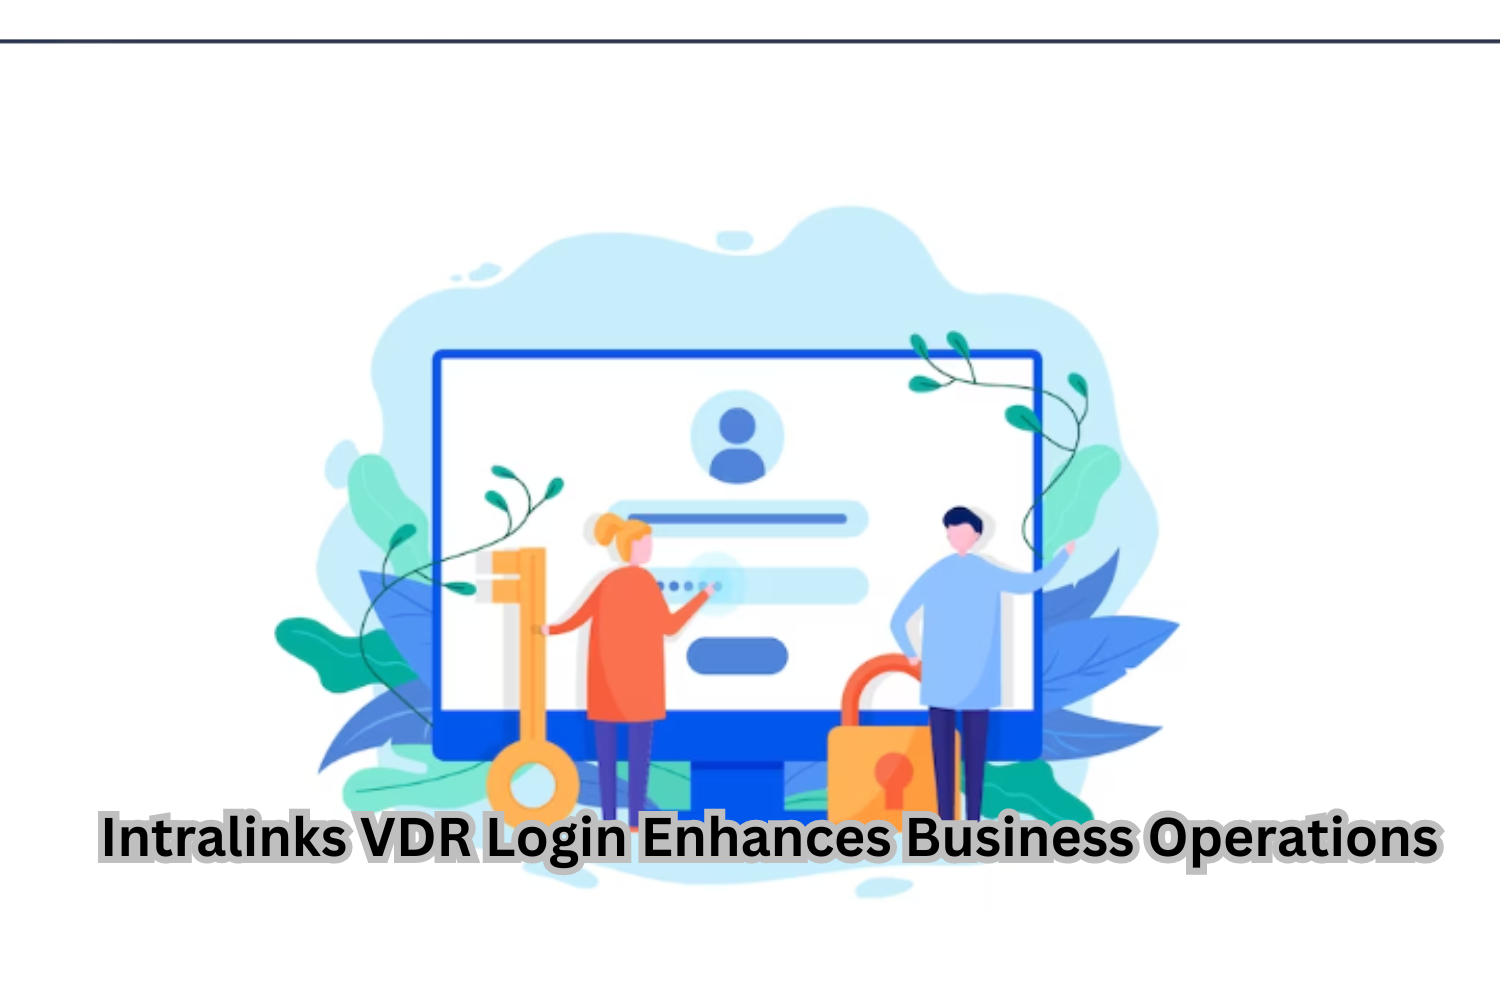 Secure access login screen for Intralinks VDR